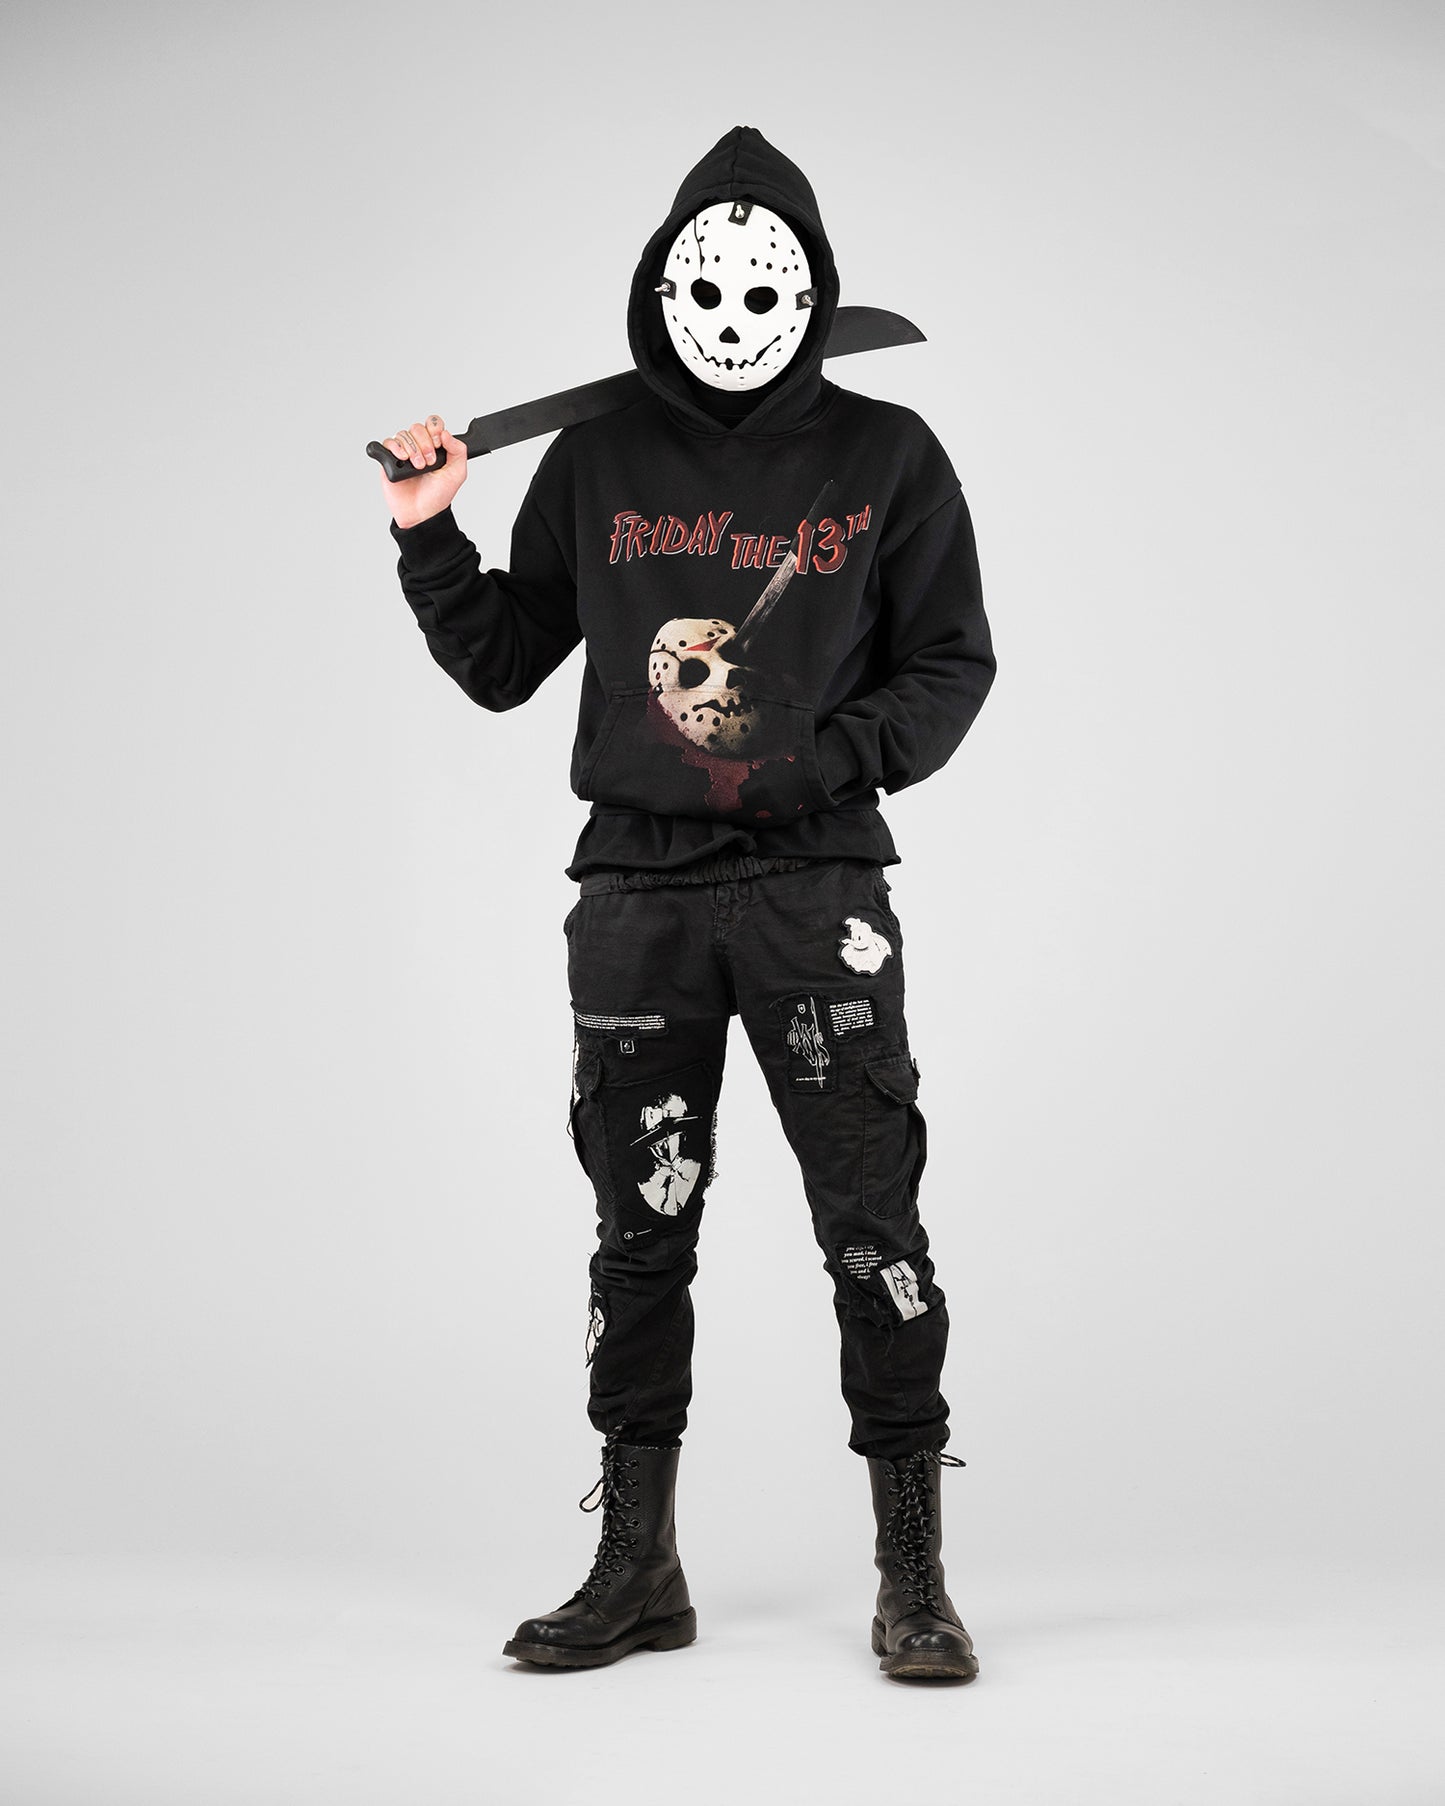 Friday the 13th hoodie